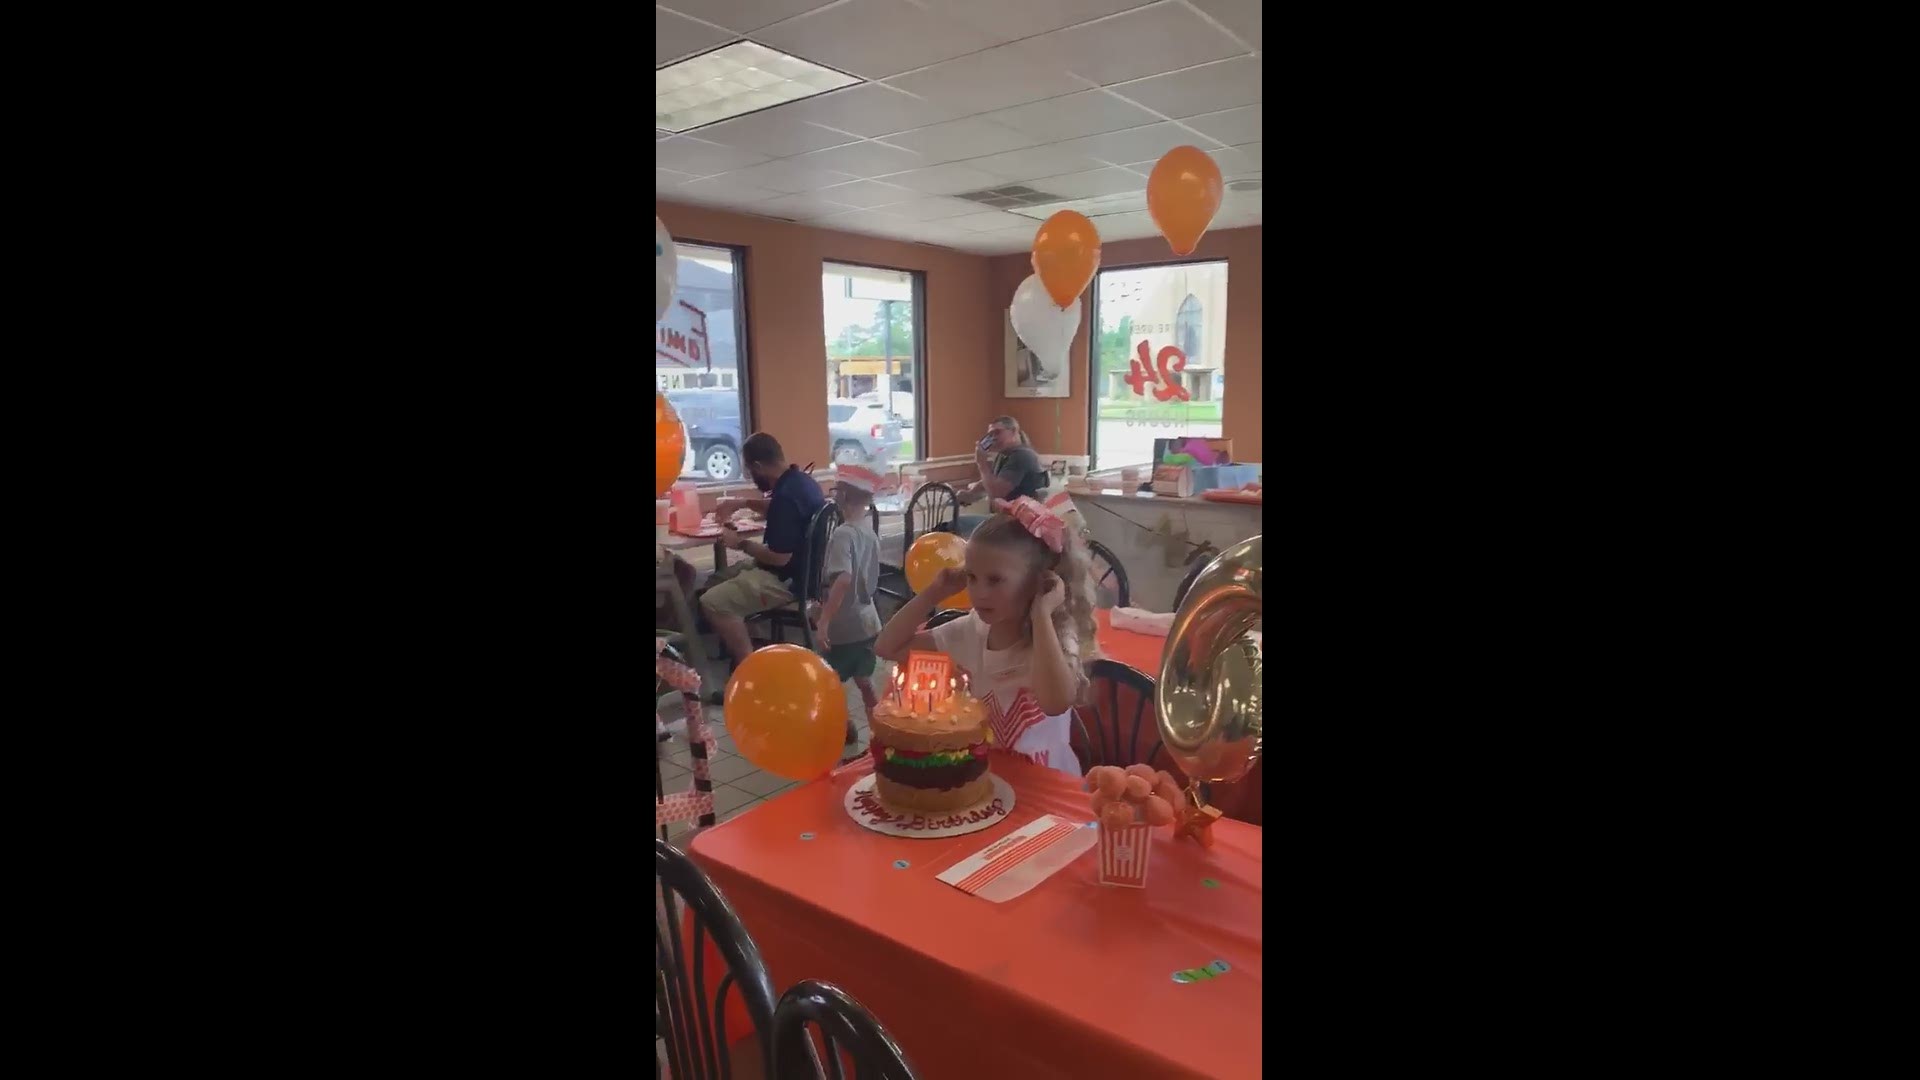 The staff at Whataburger in Vidor helped throw a very special birthday party for Becca on Saturday.